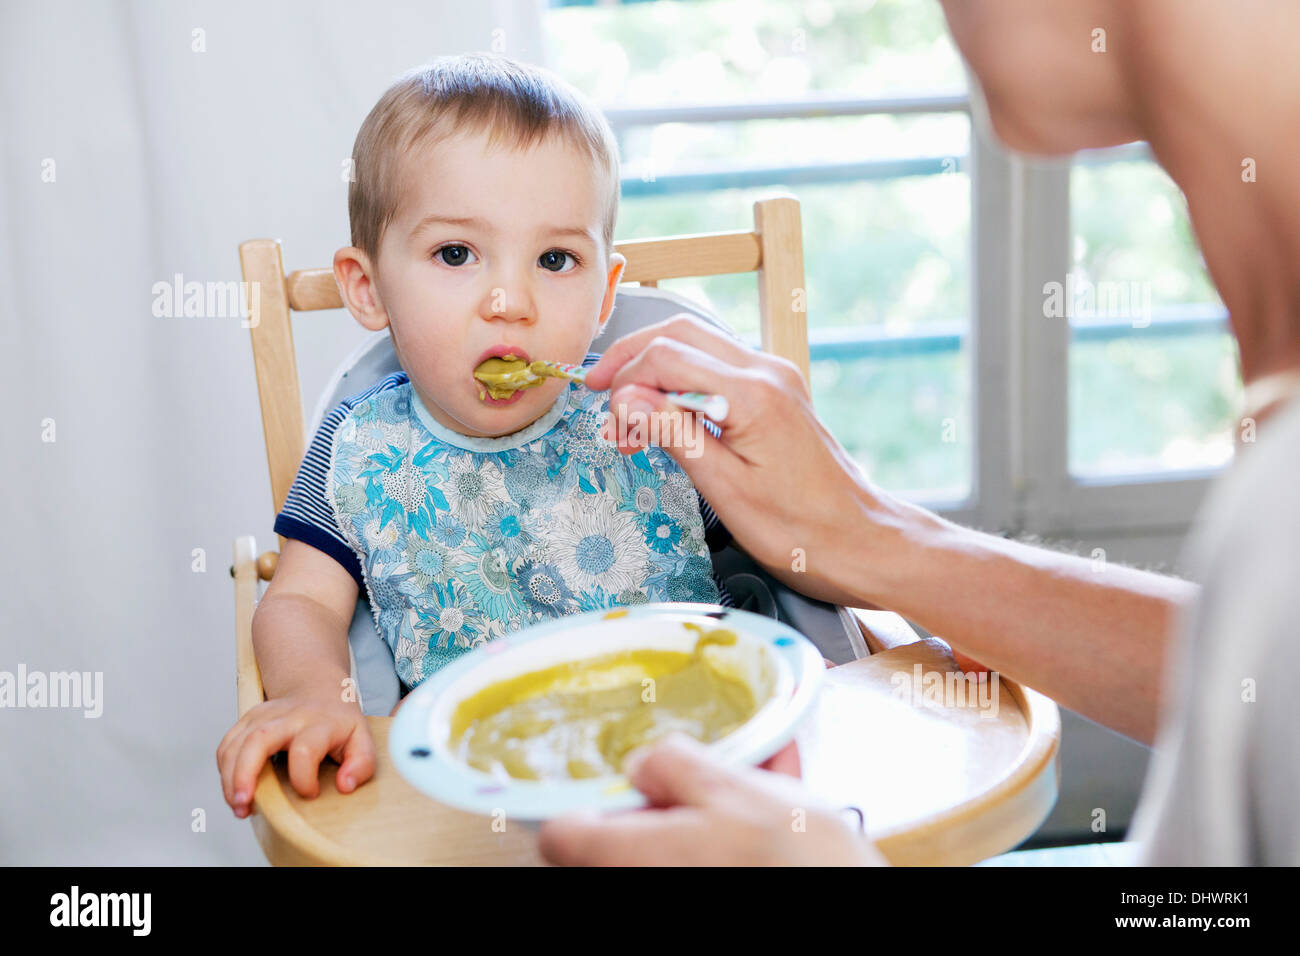 CHILD EATING A MEAL Stock Photo